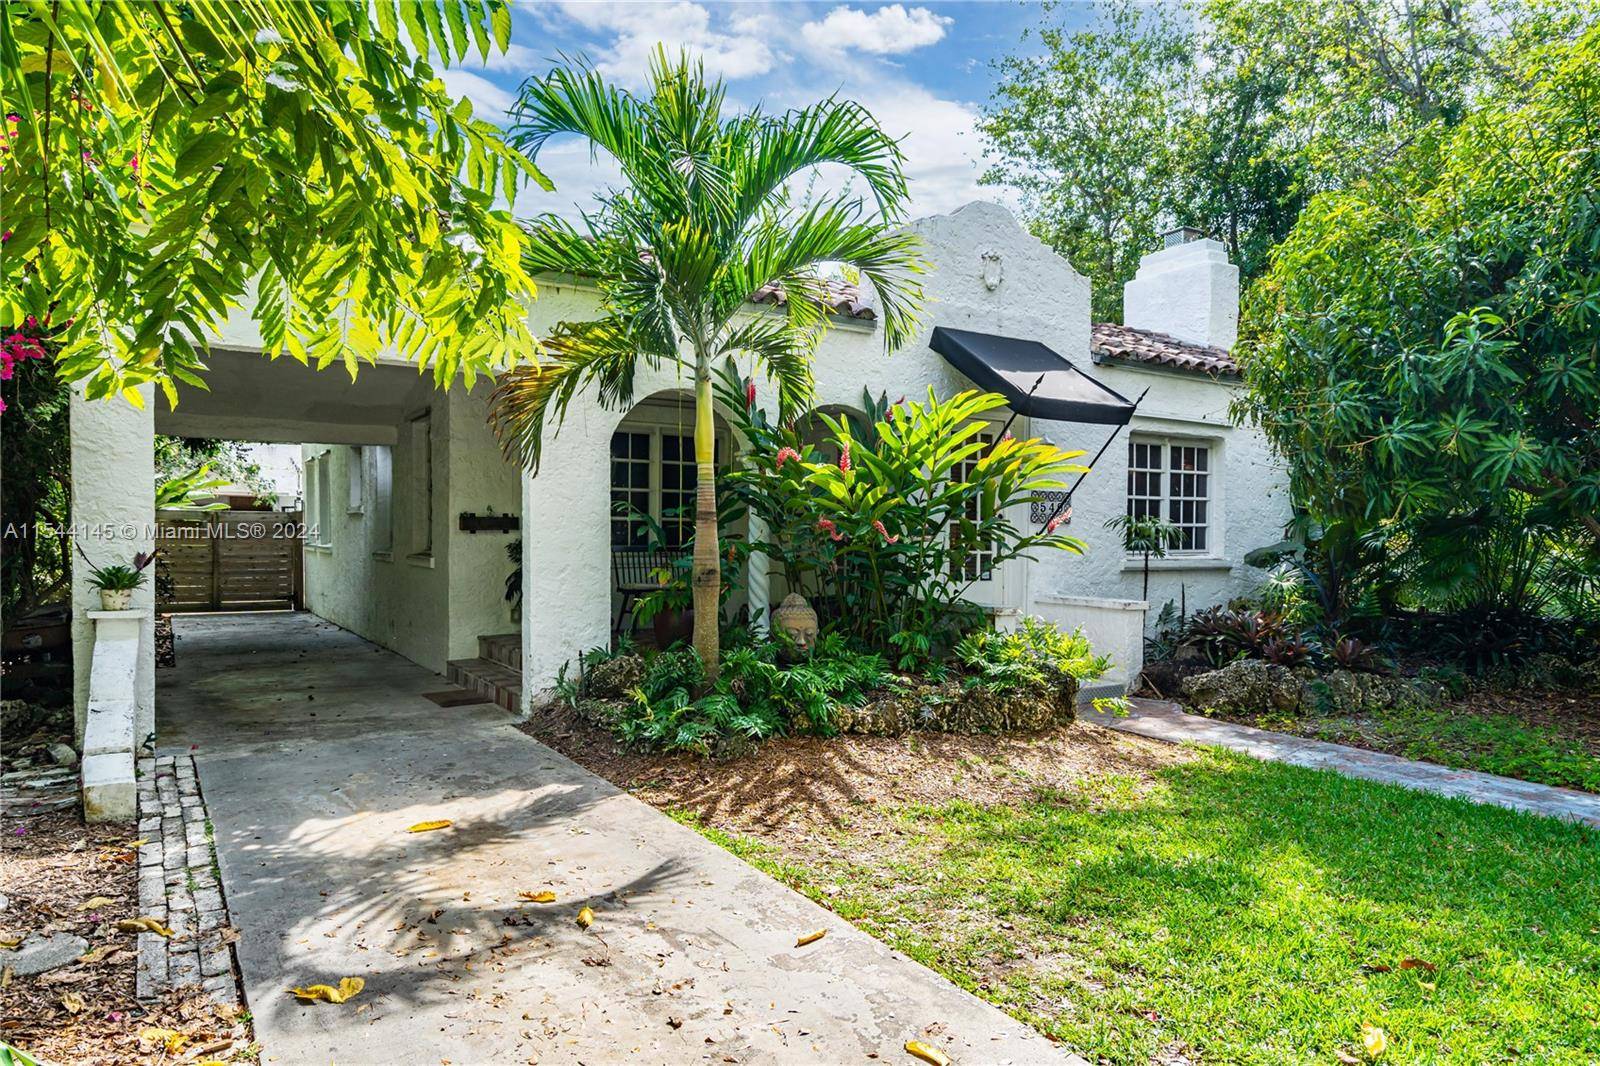 If you are looking for a cozy and charming Coral Gables home, you have found it !